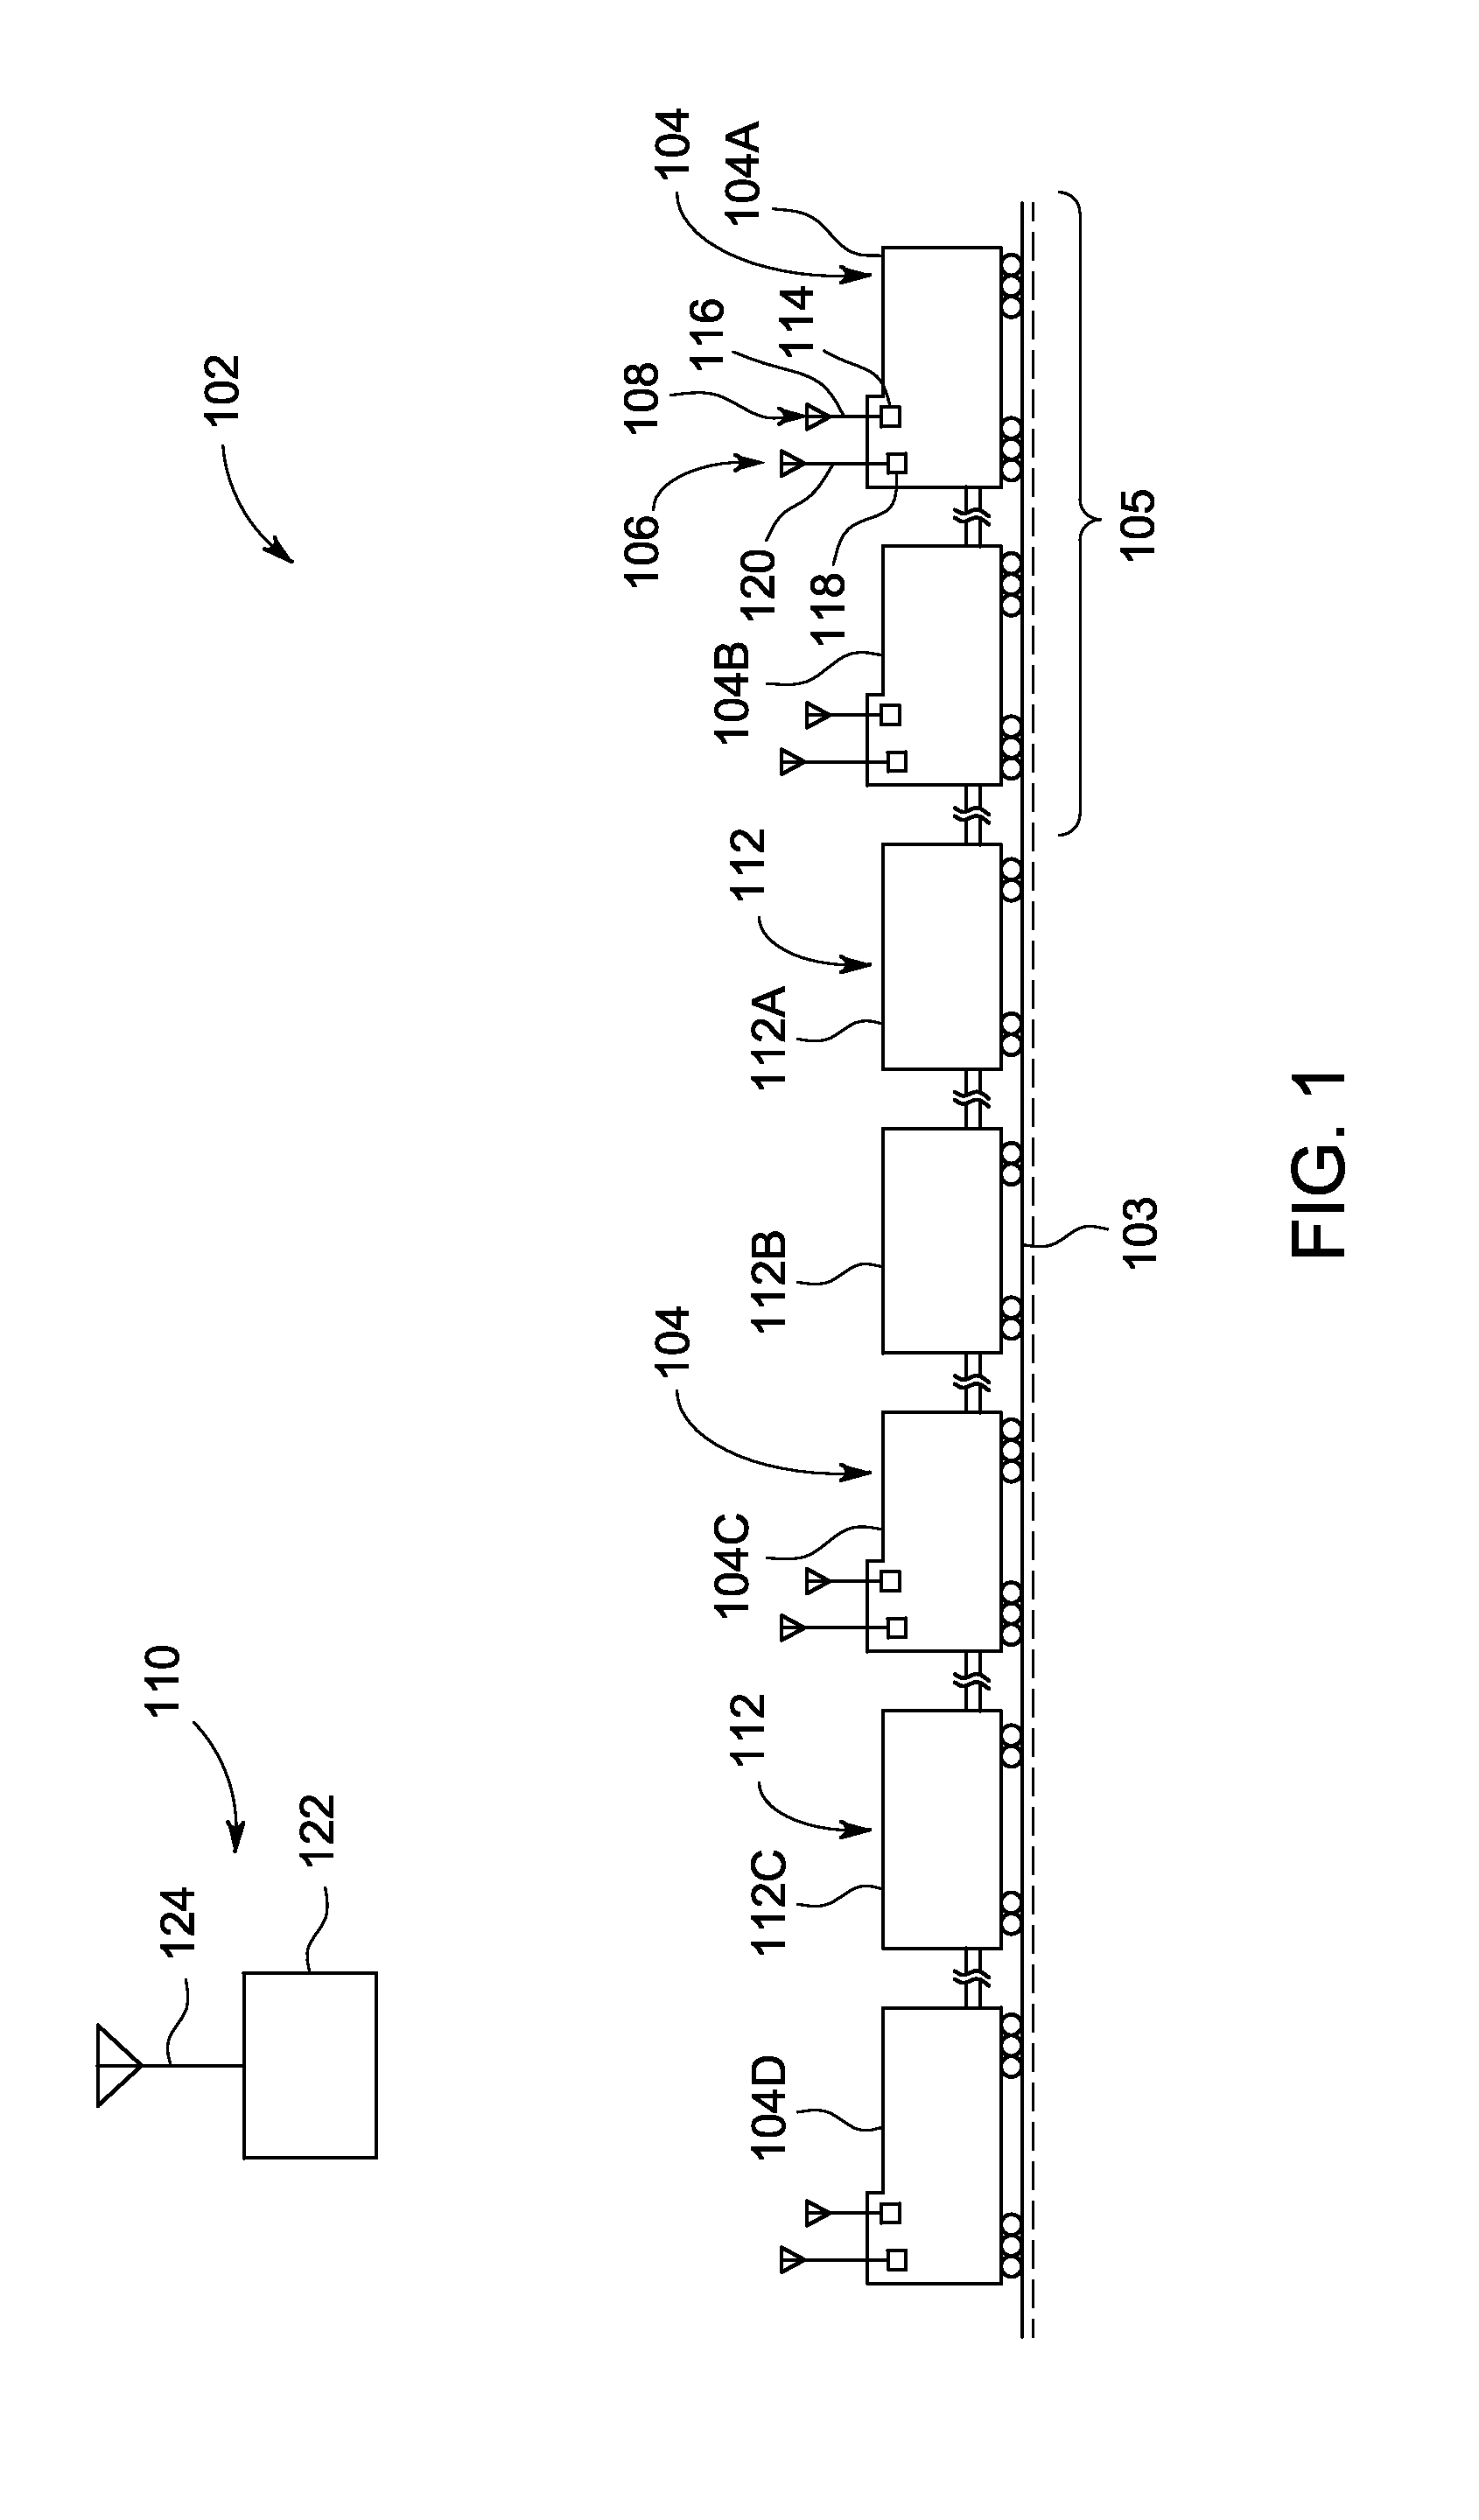 Signal communication system and method for a vehicle system